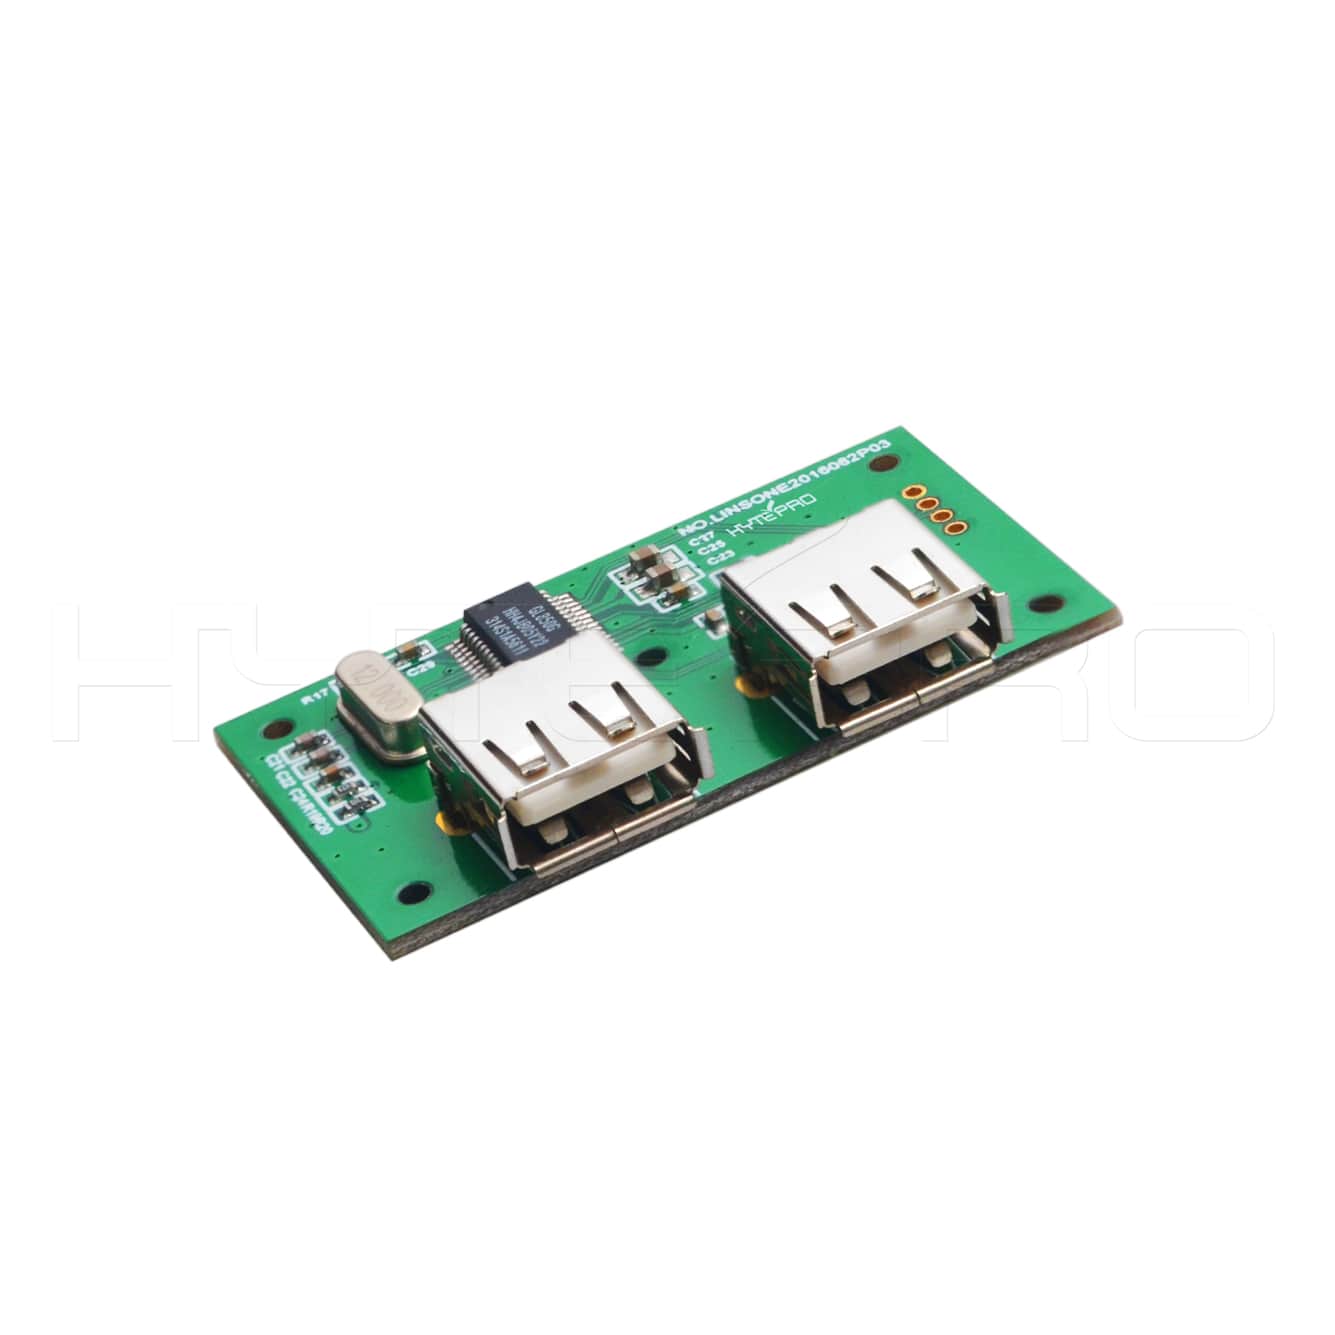 Situation Nat sted Lyrical Small 2 port external powered usb 2.0 hub connector pcb board H24